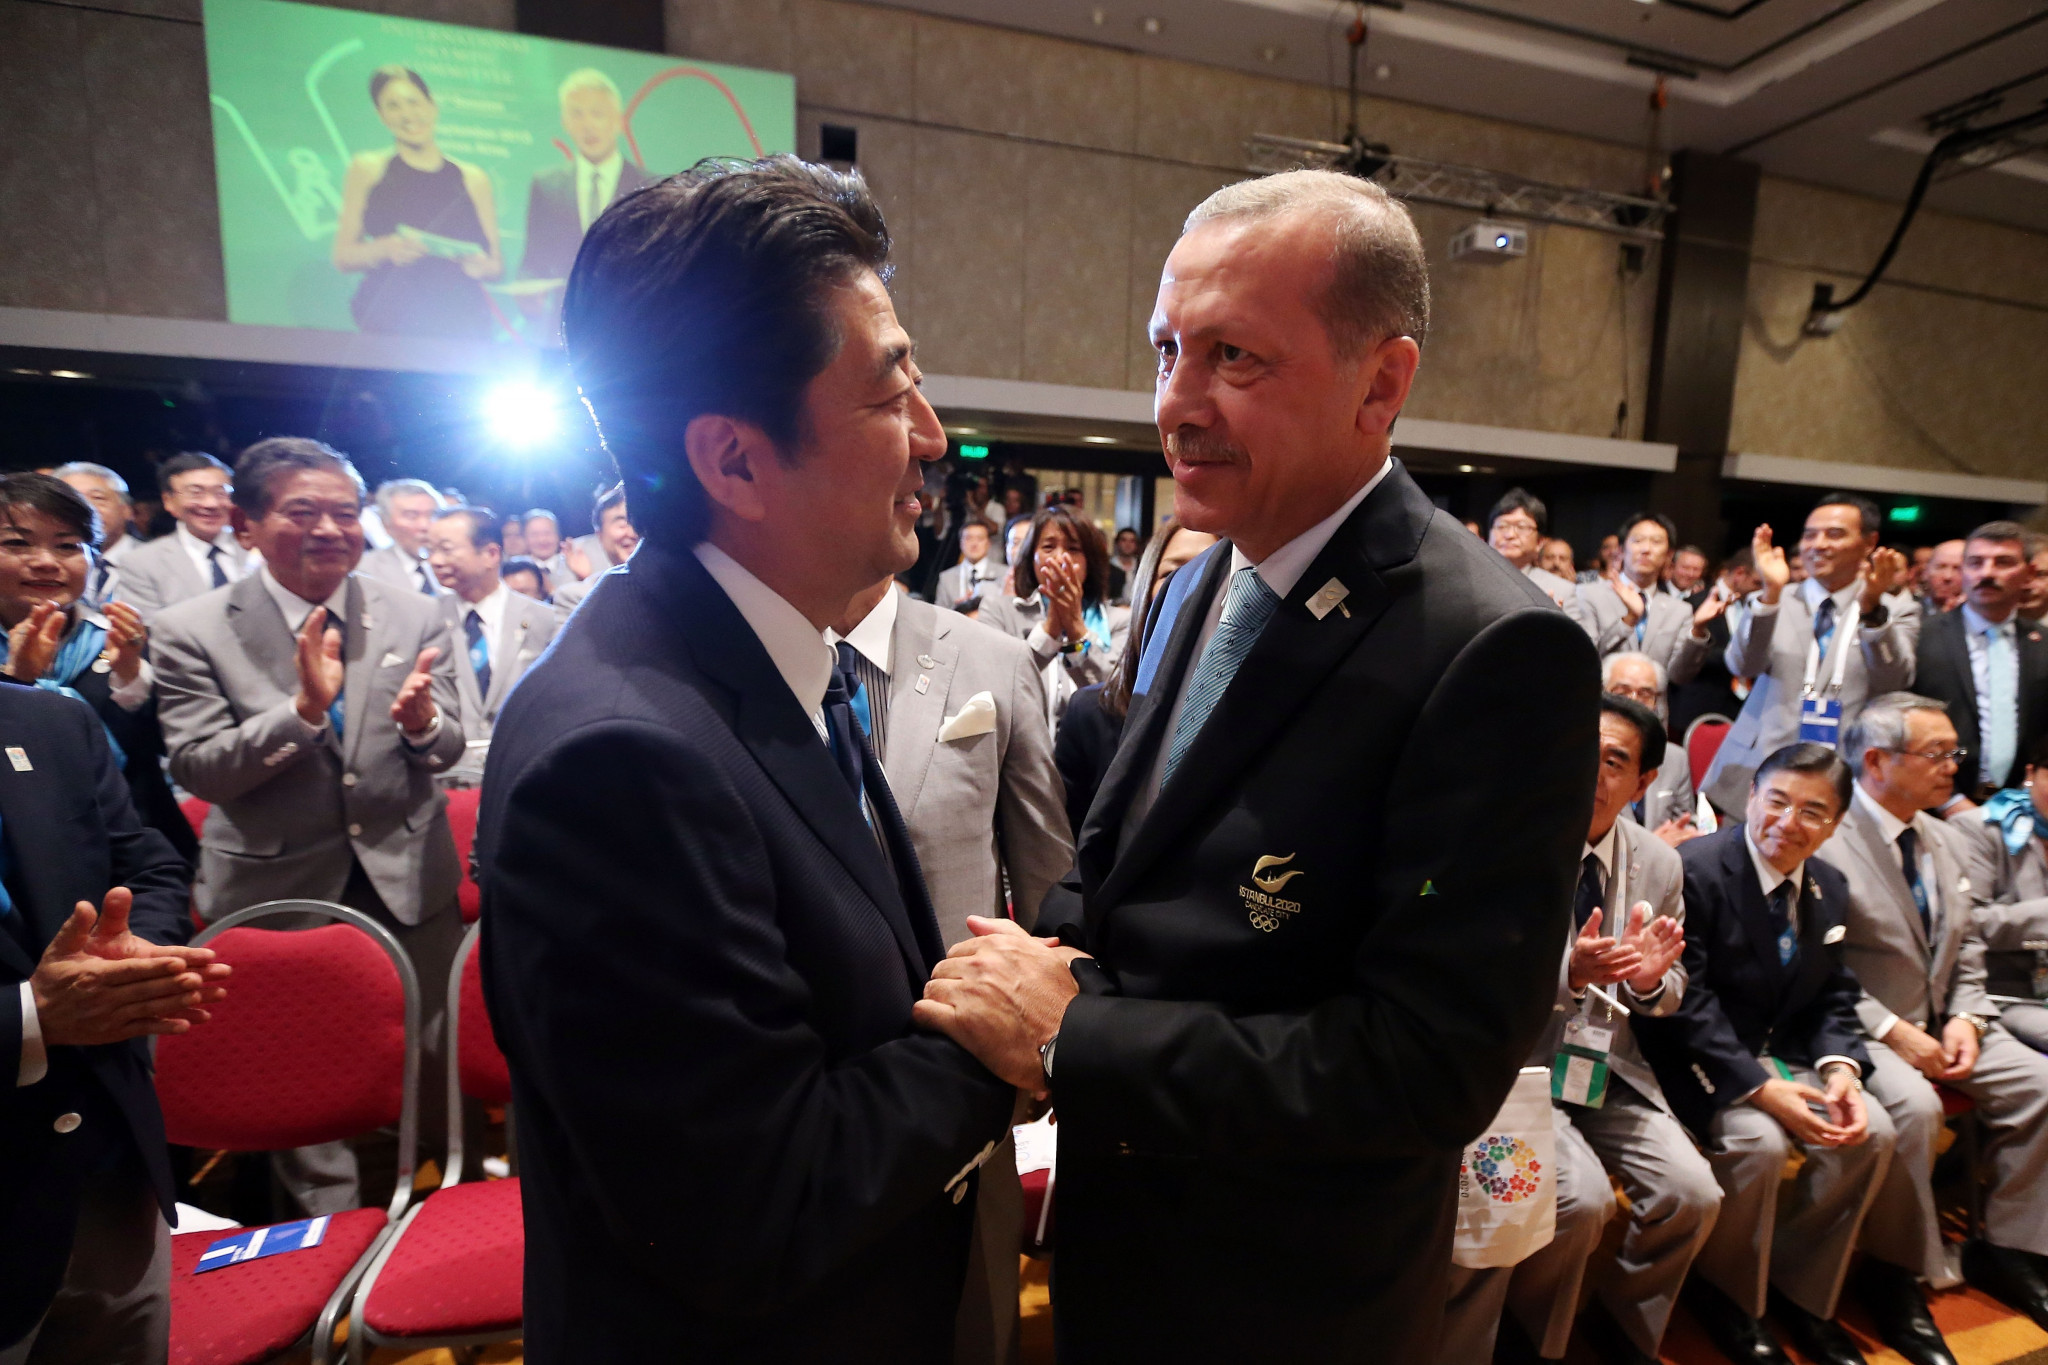 Turkish President Recep Tayyip Erdoğan congratulates the late Japanese Shinzo Abe after Tokyo defeated Istanbul to secure the 2020 Olympics hosting rights ©Getty Images